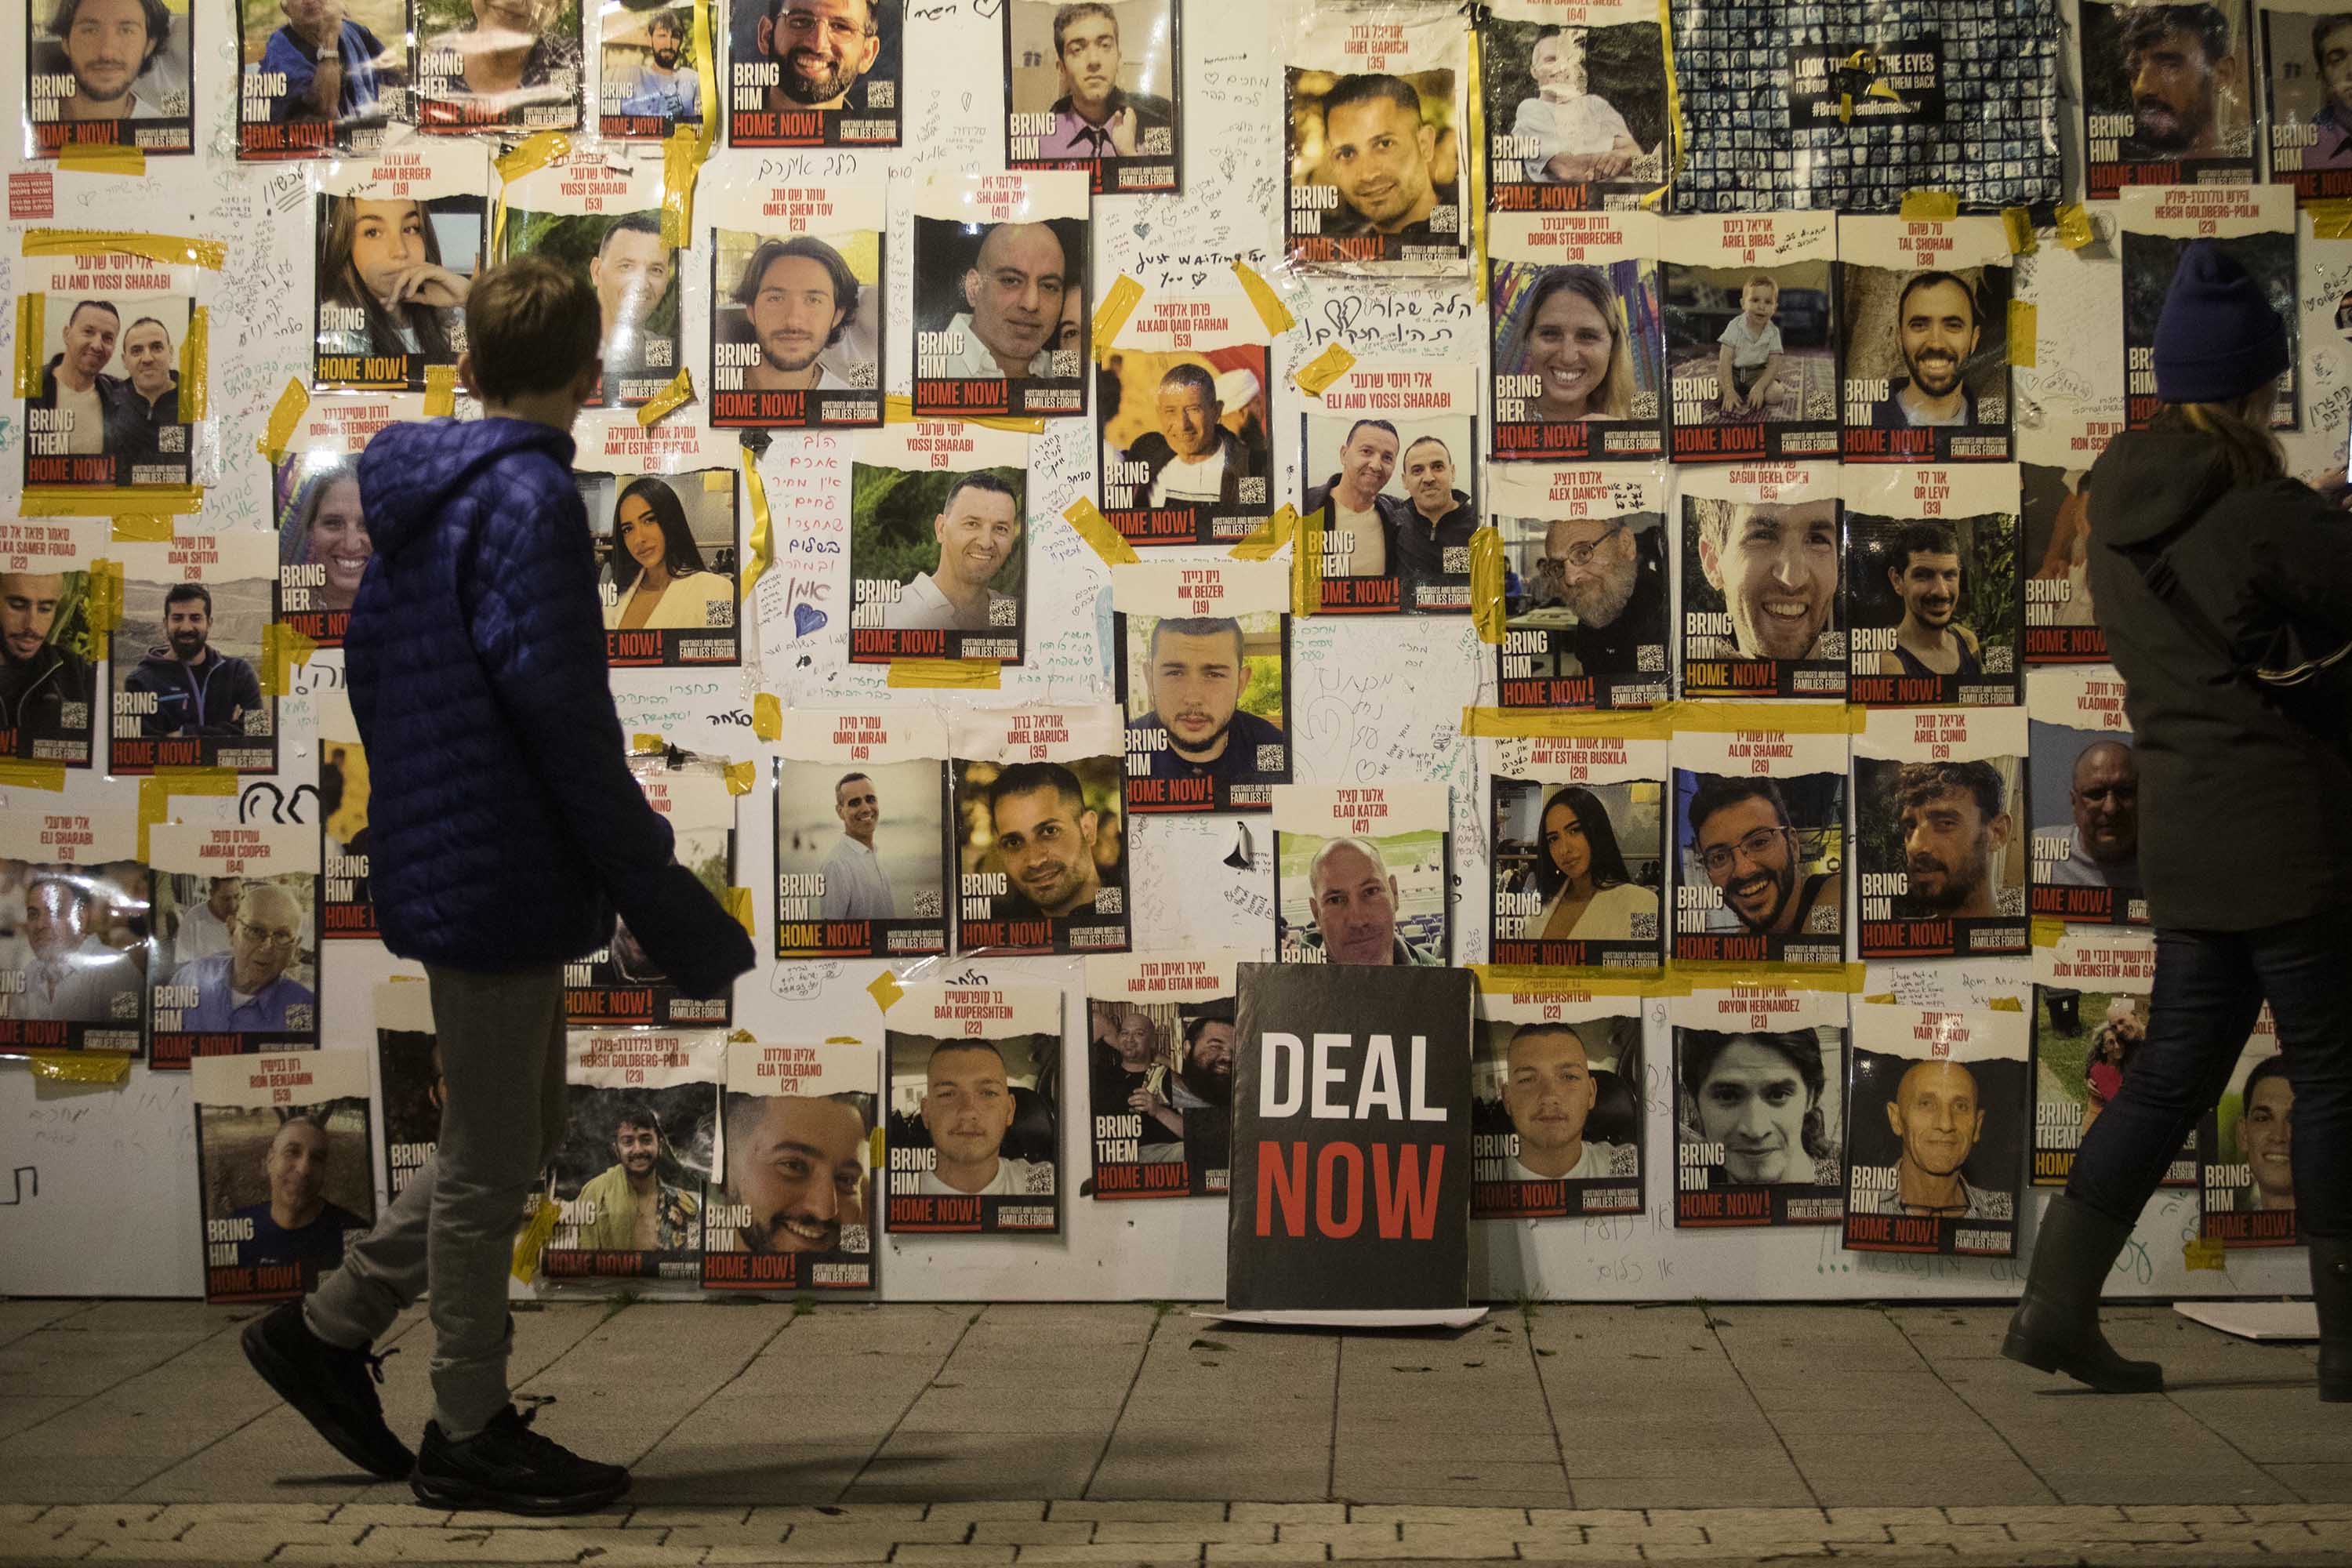 People walk by a wall with photos of hostages held by Hamas in Gaza, during a rally calling for release of all hostages, on January 27, in Tel Aviv, Israel. 